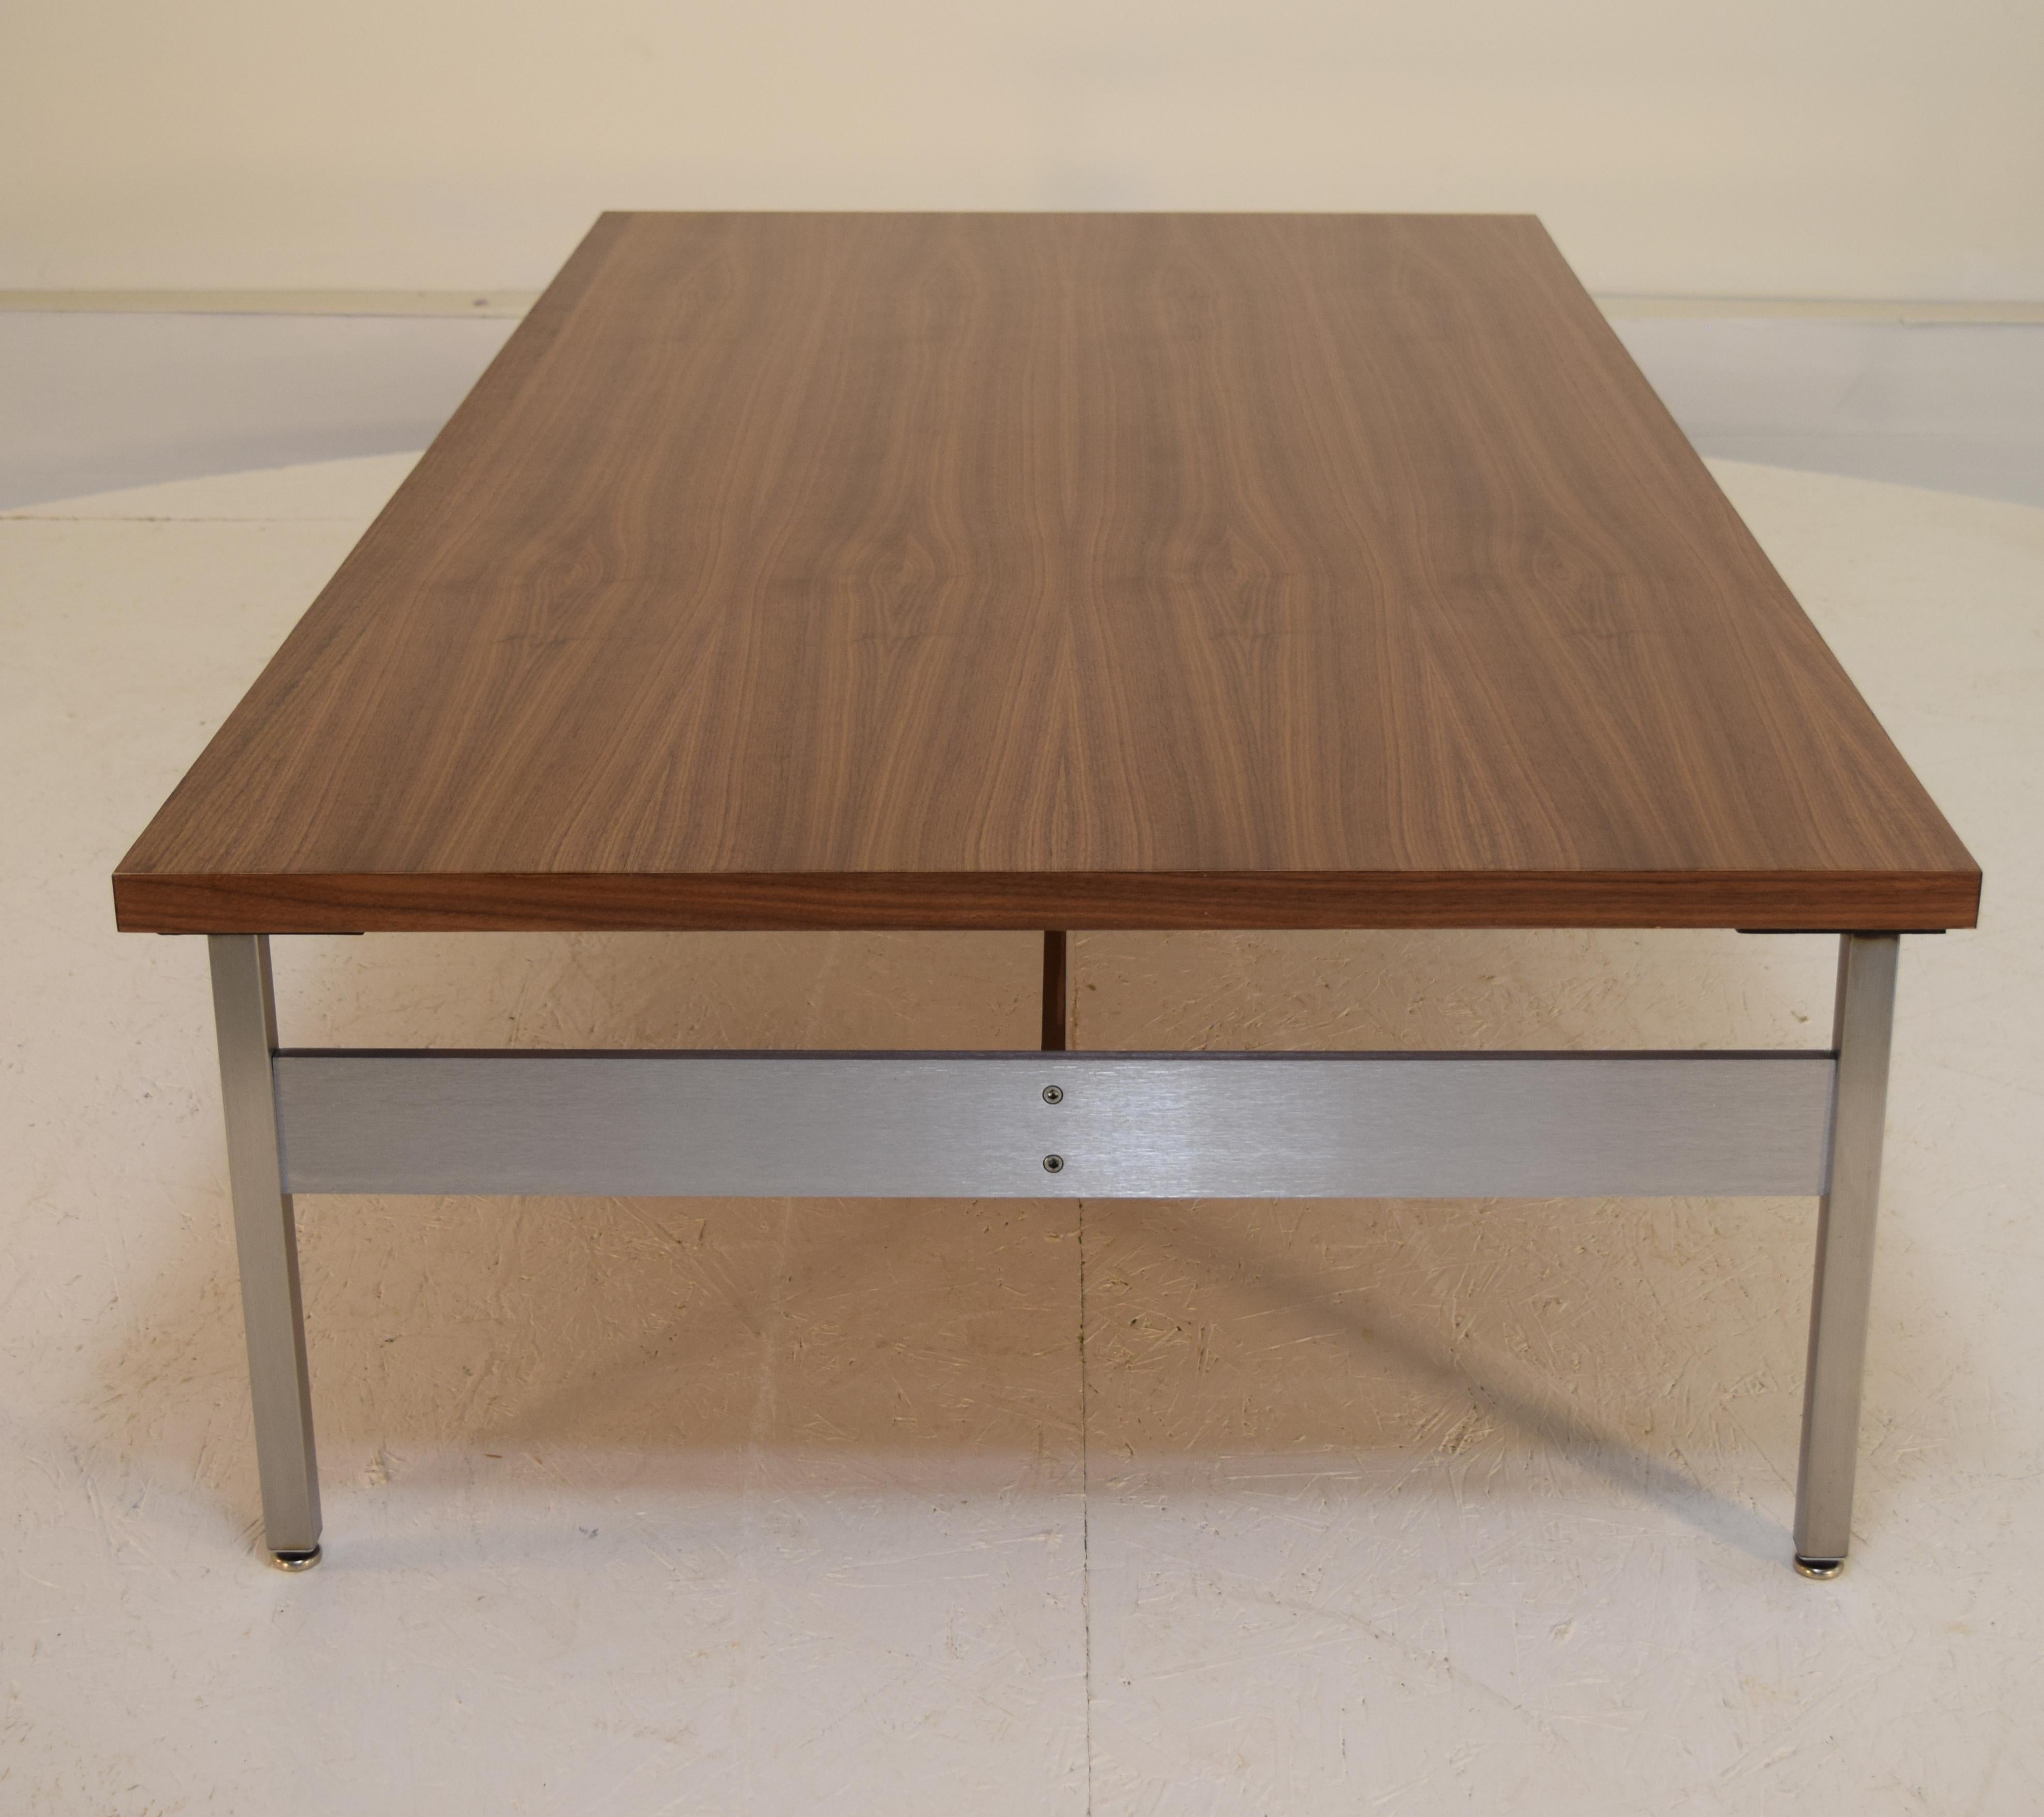 American Giant Walnut Coffee Table with Brushed Aluminum and Steel by Lehigh Leopold